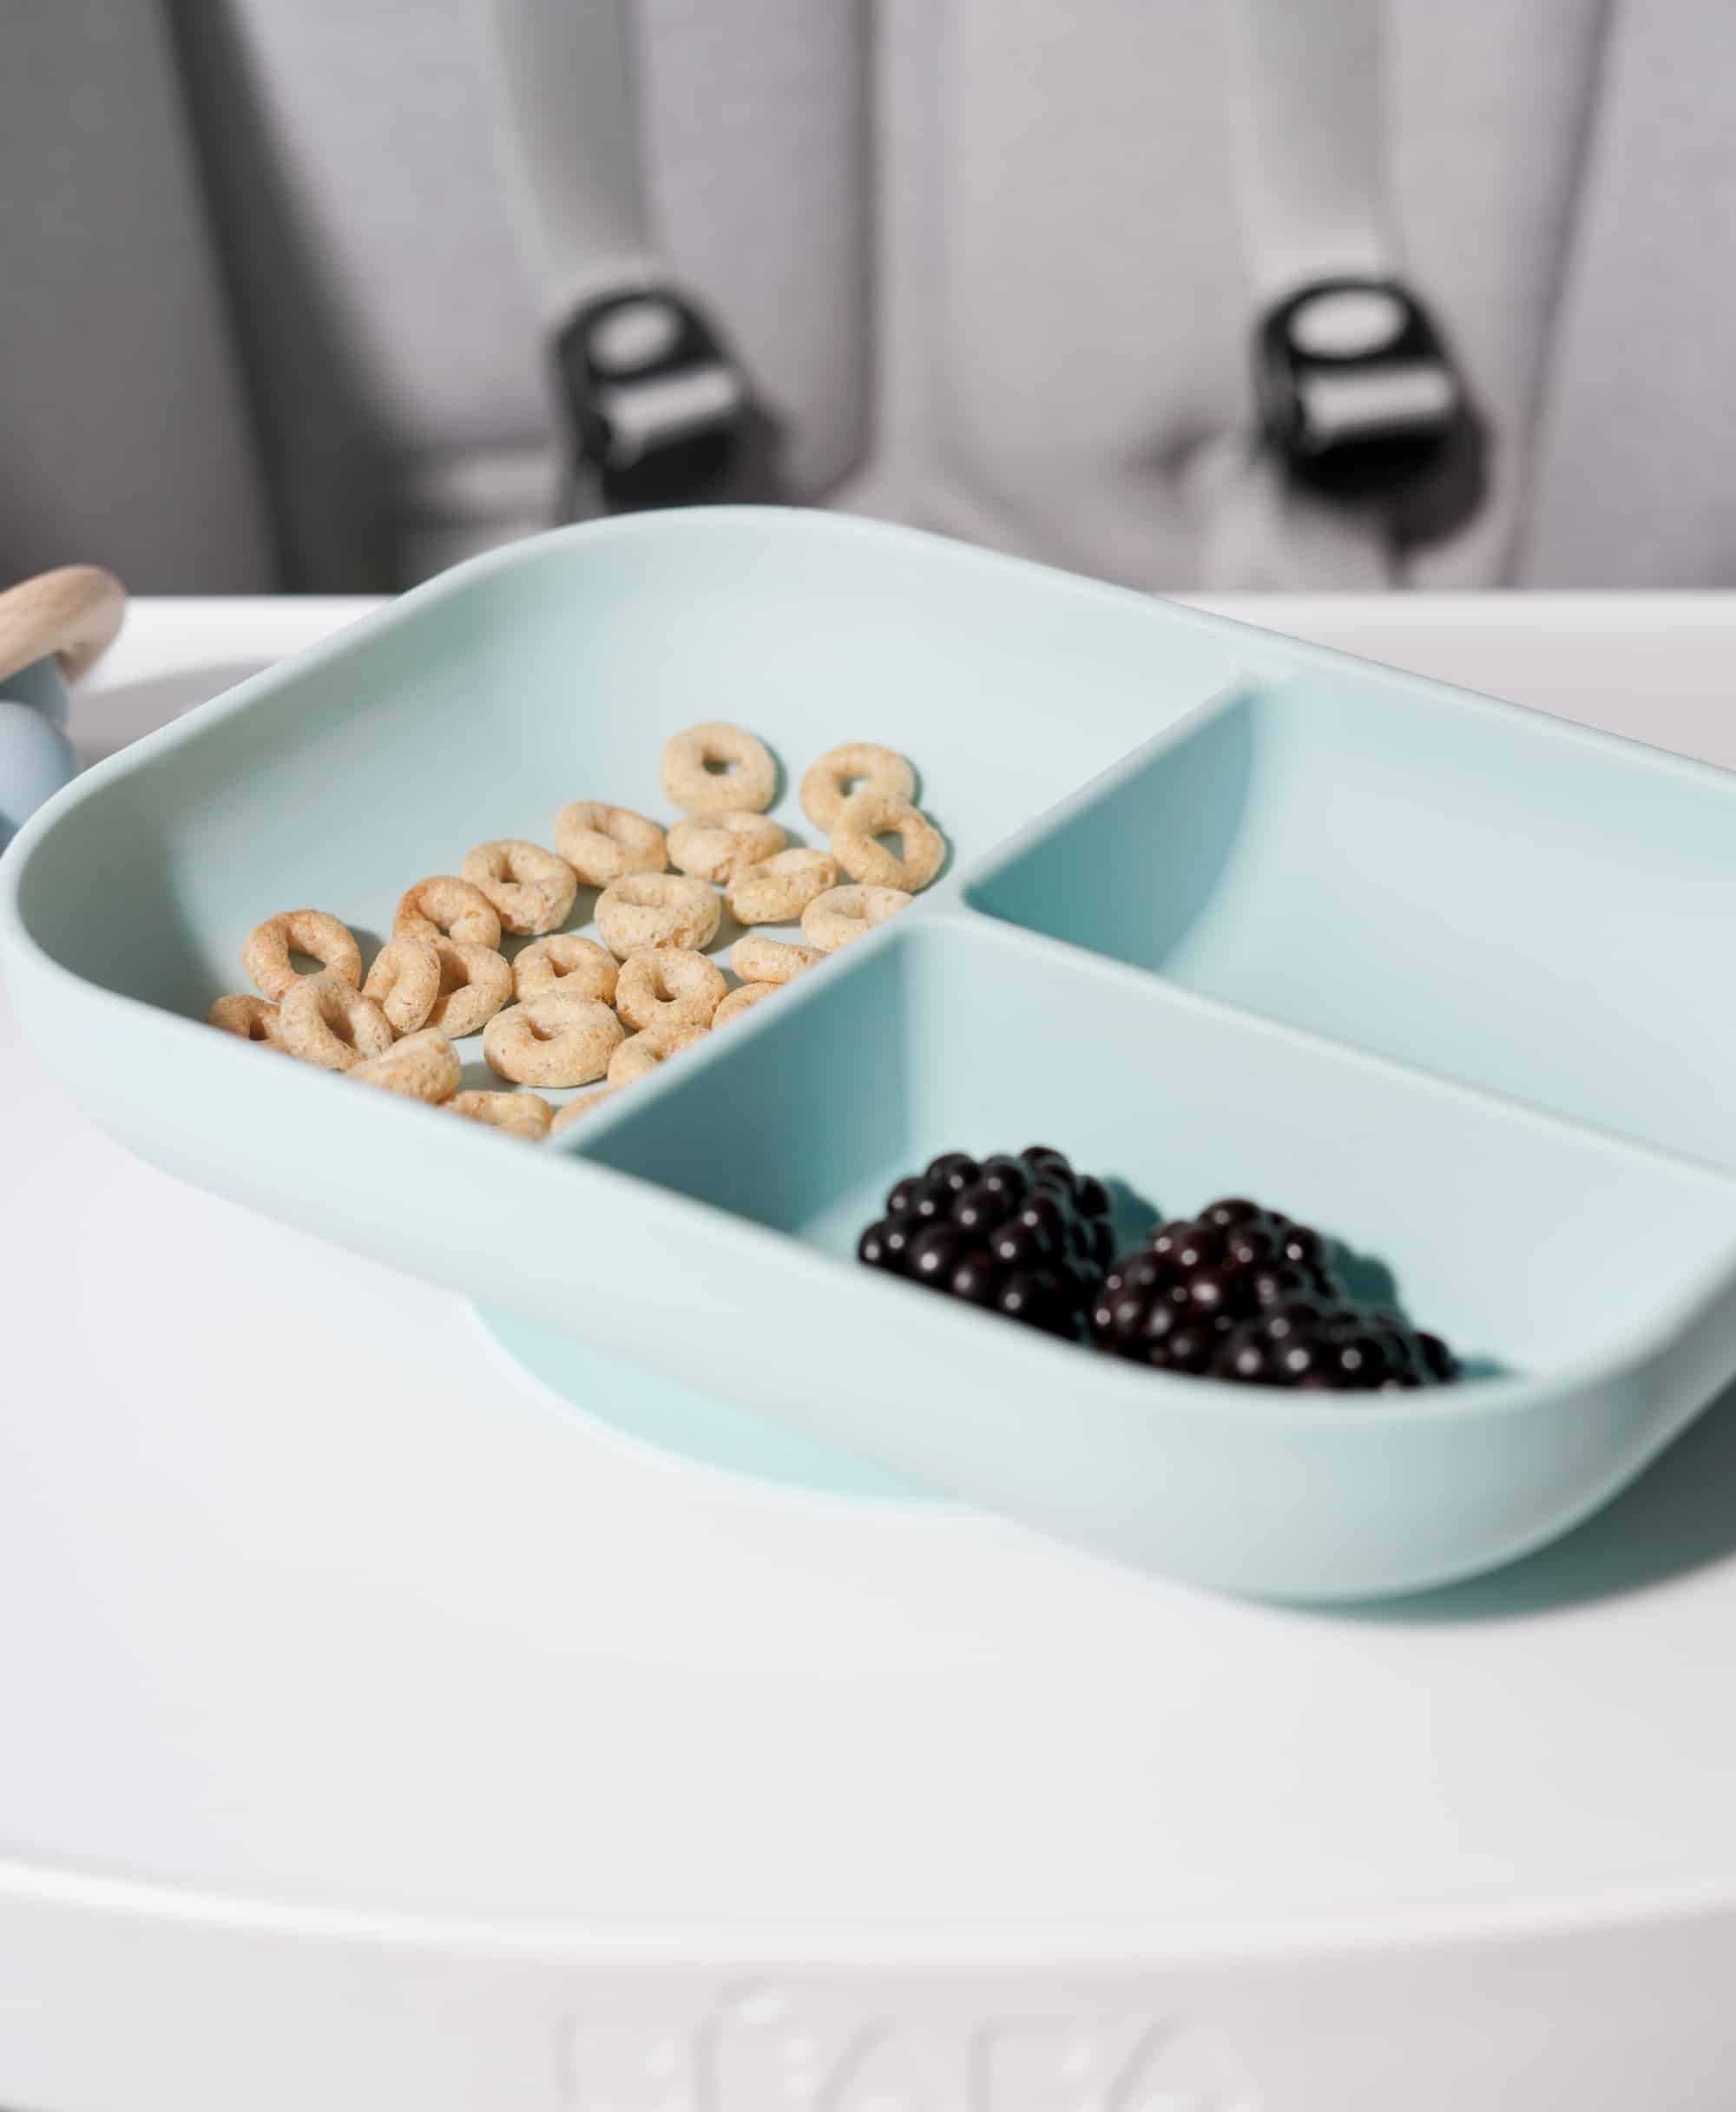 Beaba Divided Silicone Suction Plate in Rain with cheerios and blueberry